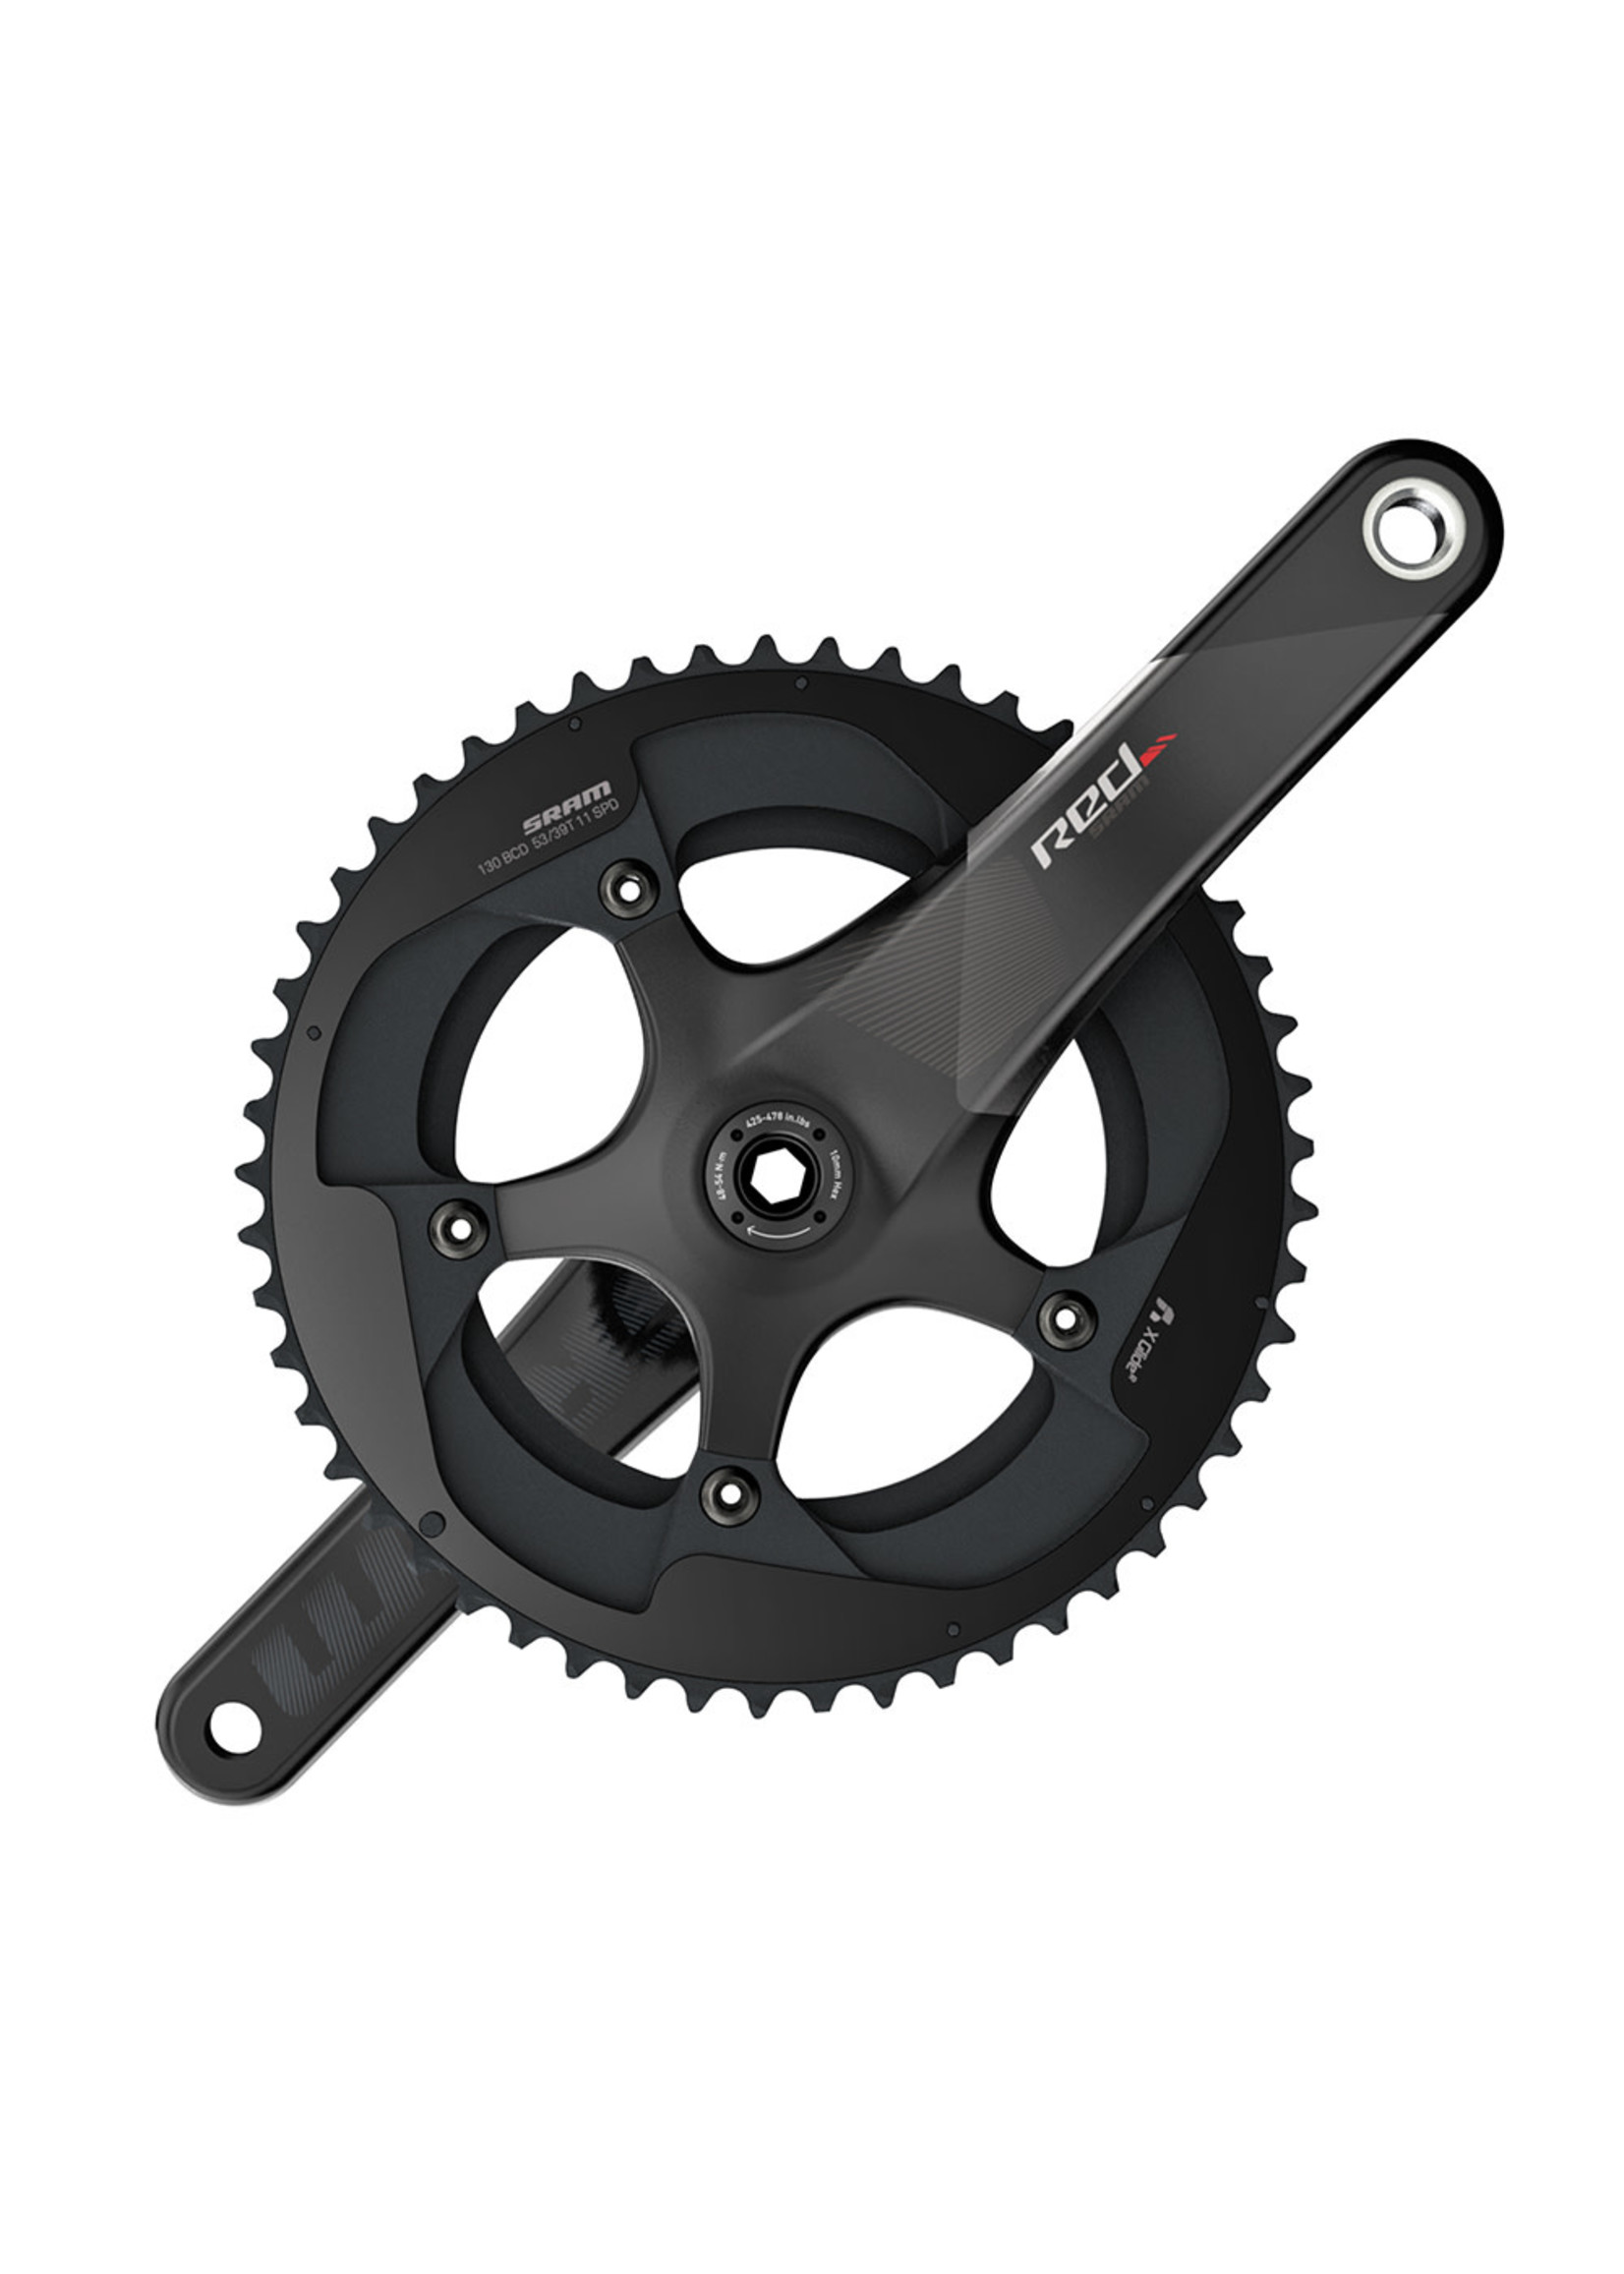 SRAM Crank Set Red GXP 175 53-39 Yaw, GXP Cups NOT Included C2